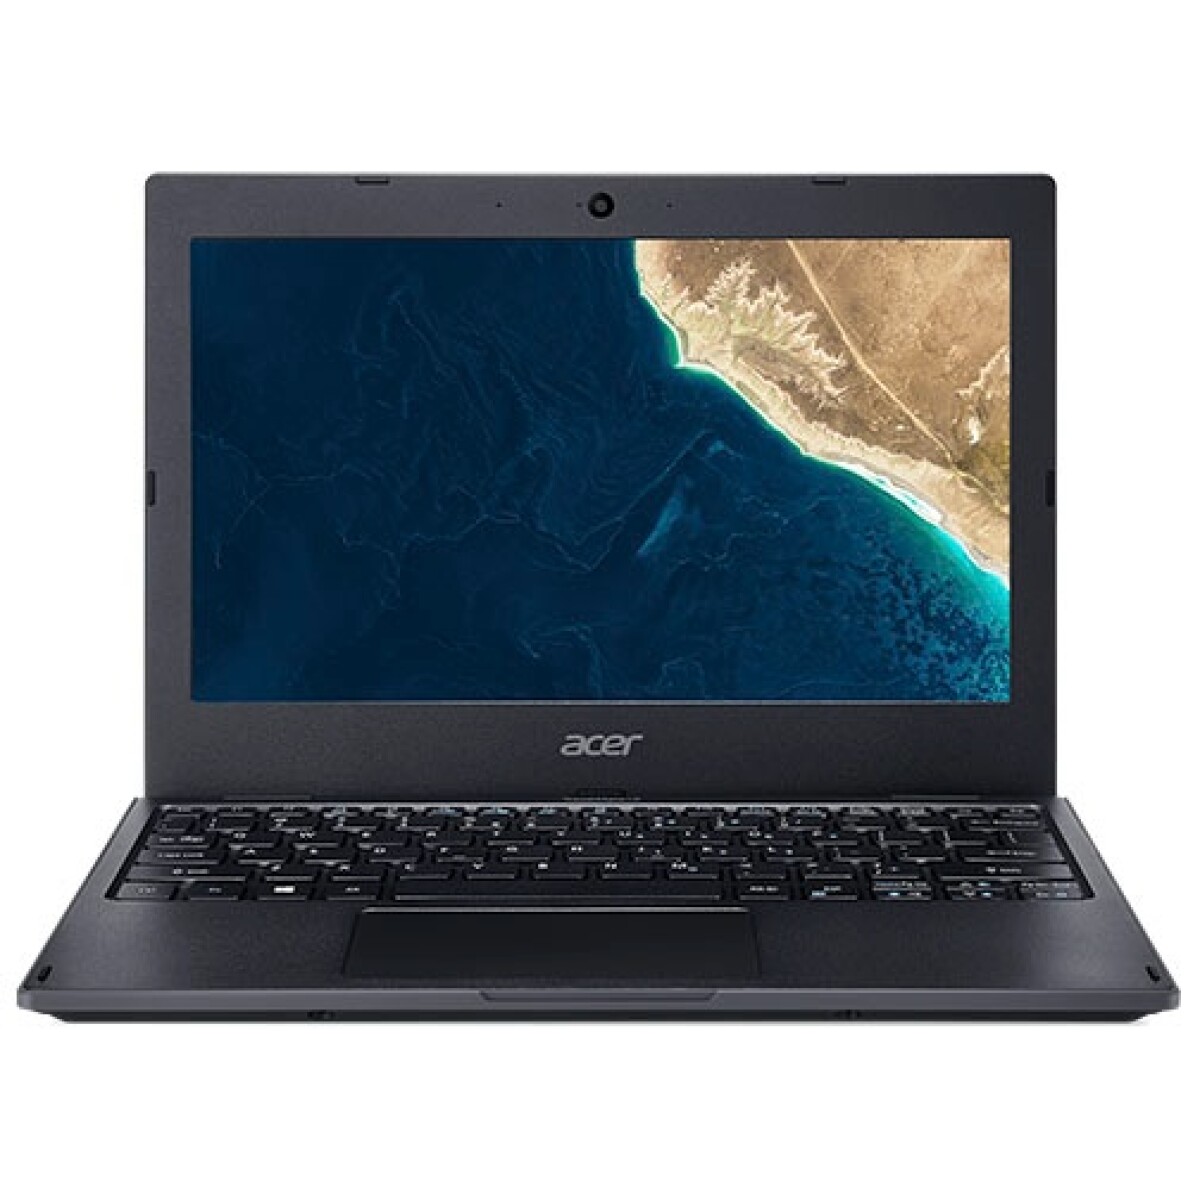 Notebook Acer Dualcore 64GB 4GB W10 - 001 